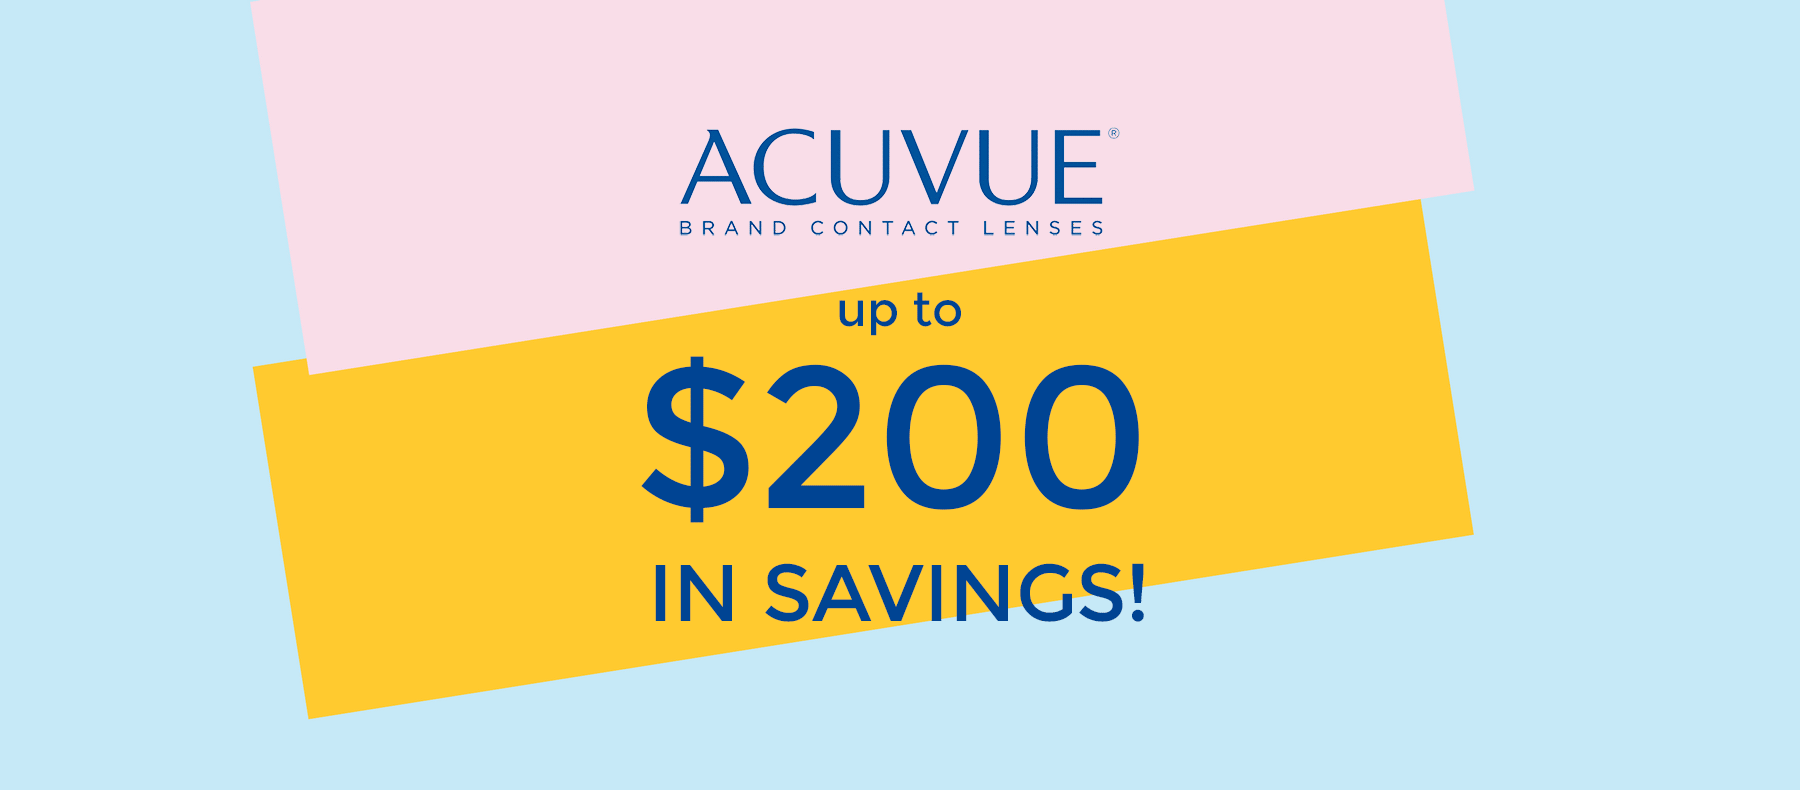 MyACUVUE Rewards Save Up To 200 On Acuvue Contact Lenses Mott 